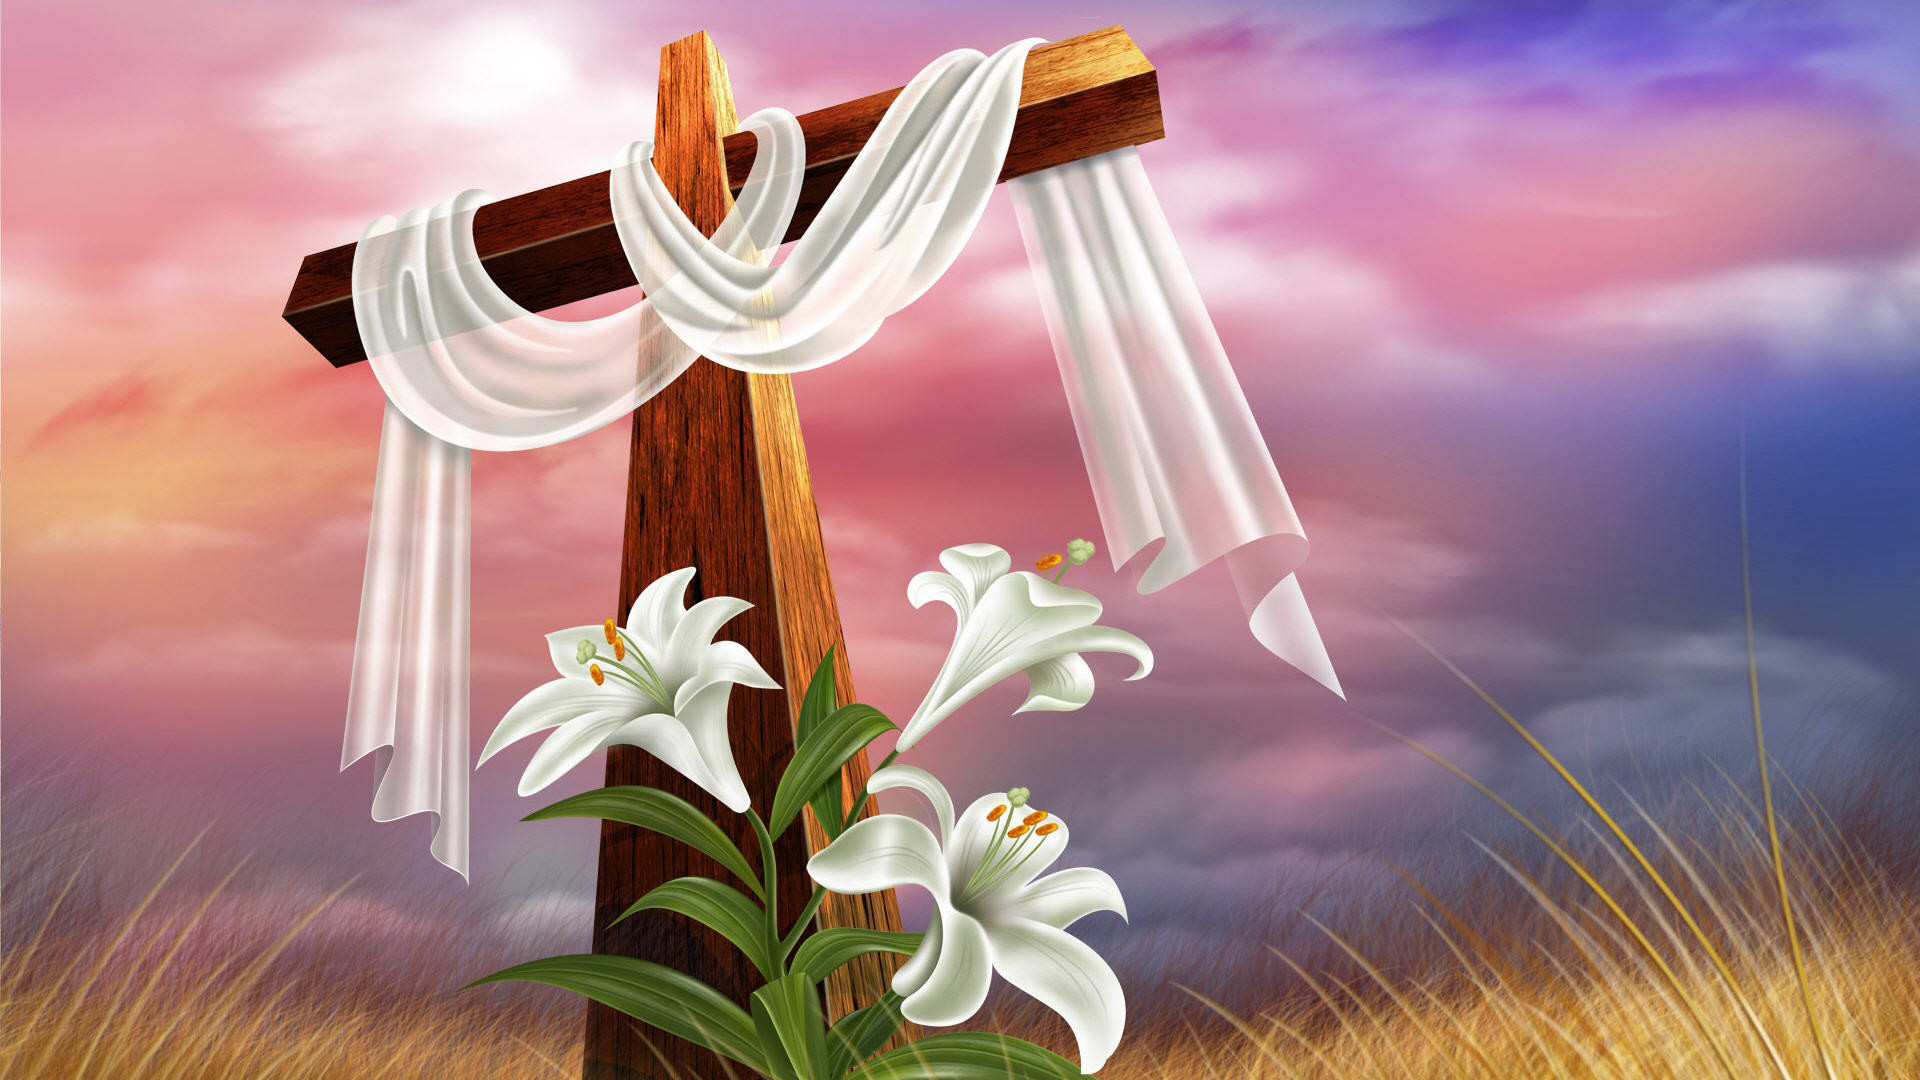 Free Easter Desktop Wallpapers Backgrounds - Religious Catholic Easter - HD Wallpaper 